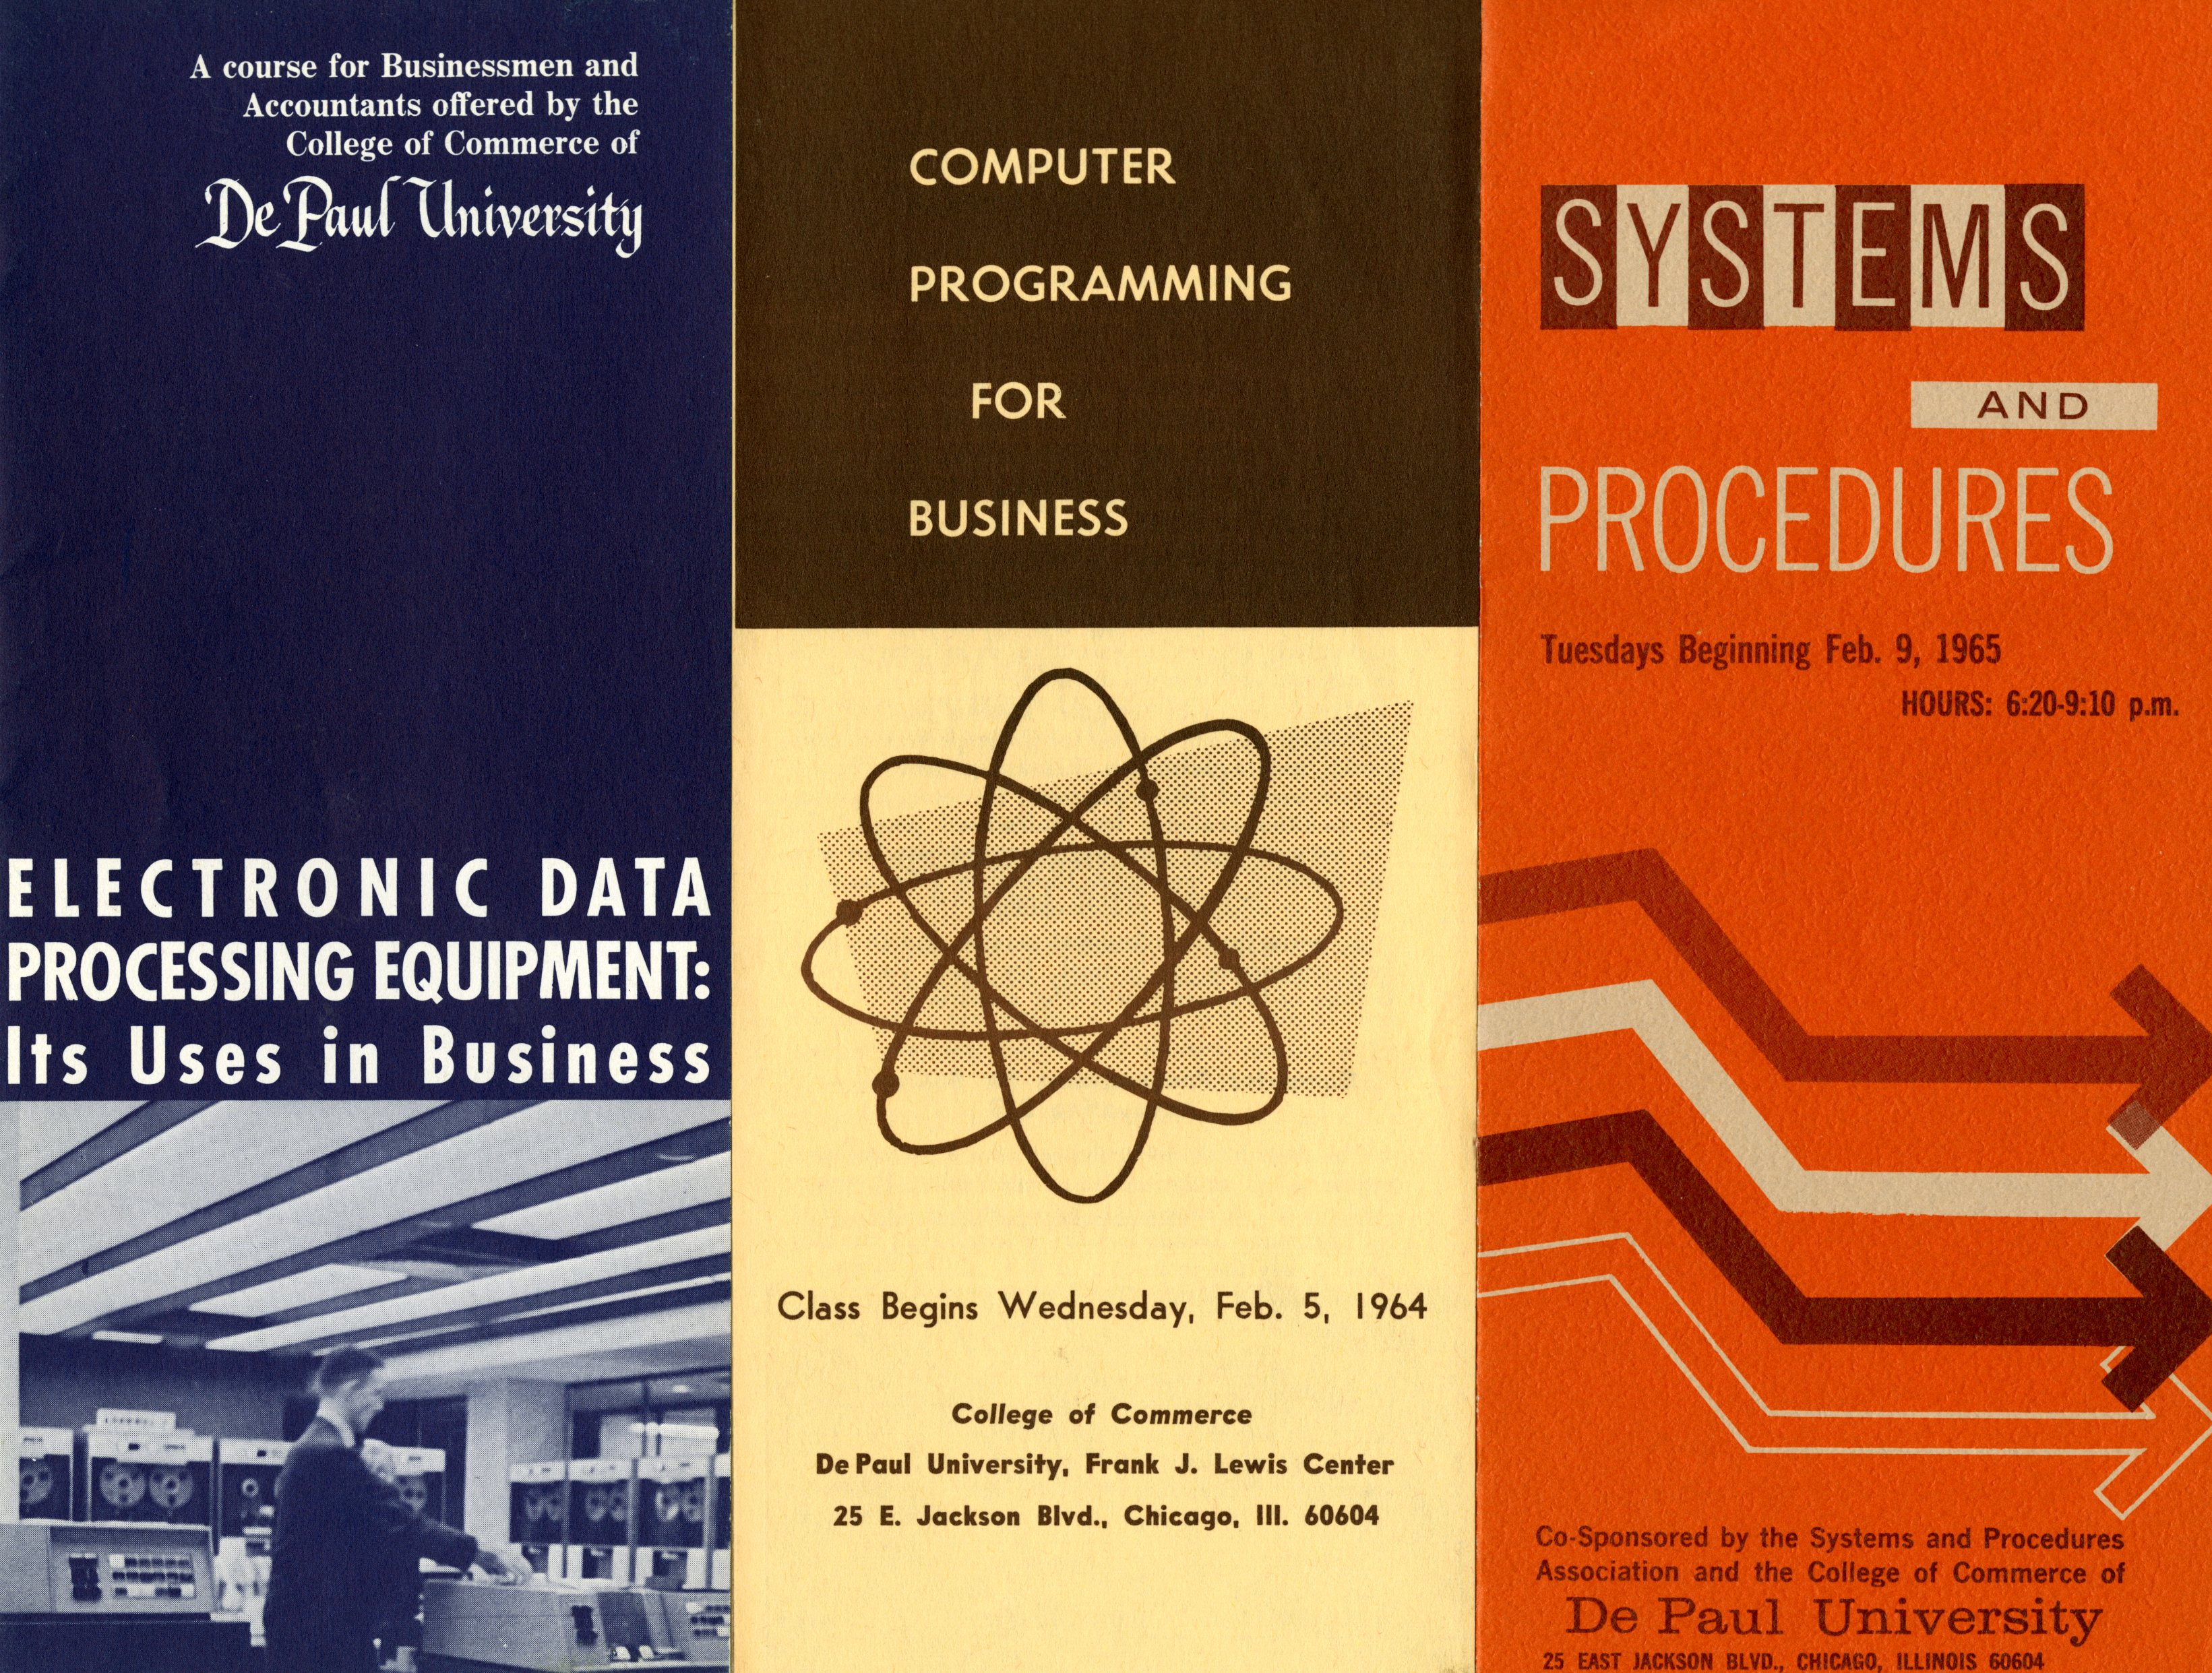 A series of brochures advertising computer science courses in the College of Commerce, 1960s